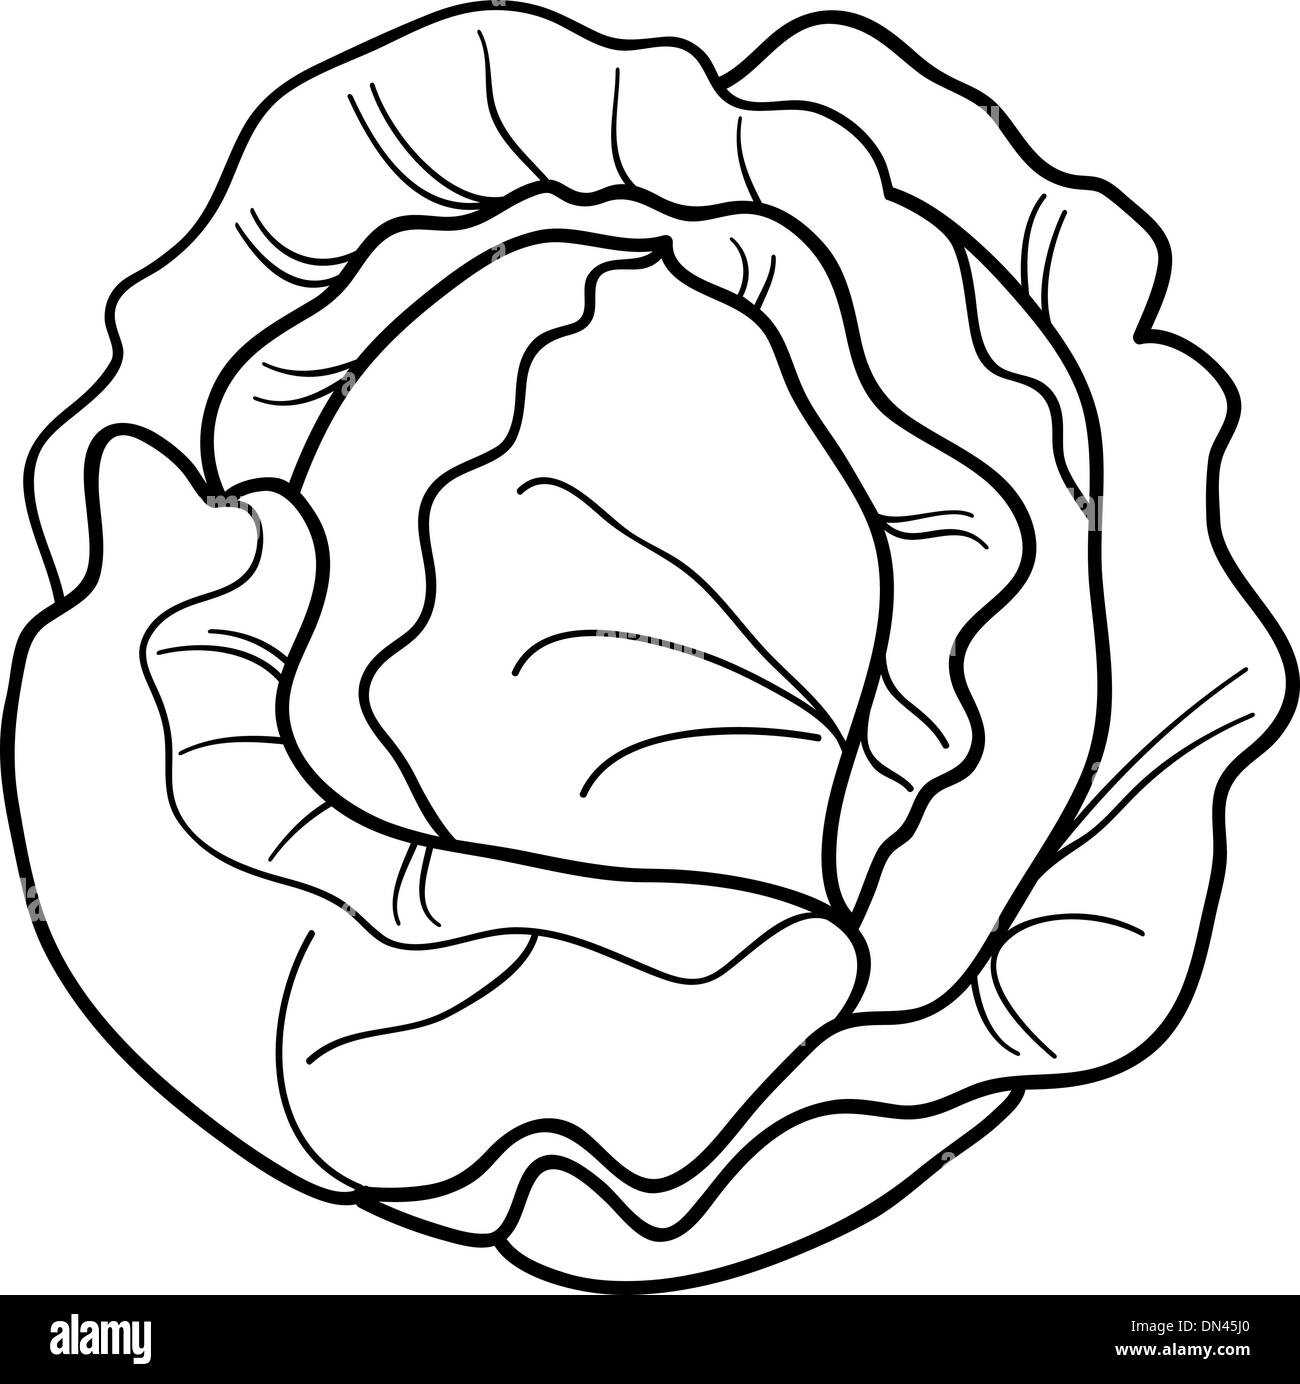 cabbage vegetable cartoon for coloring book Stock Vector